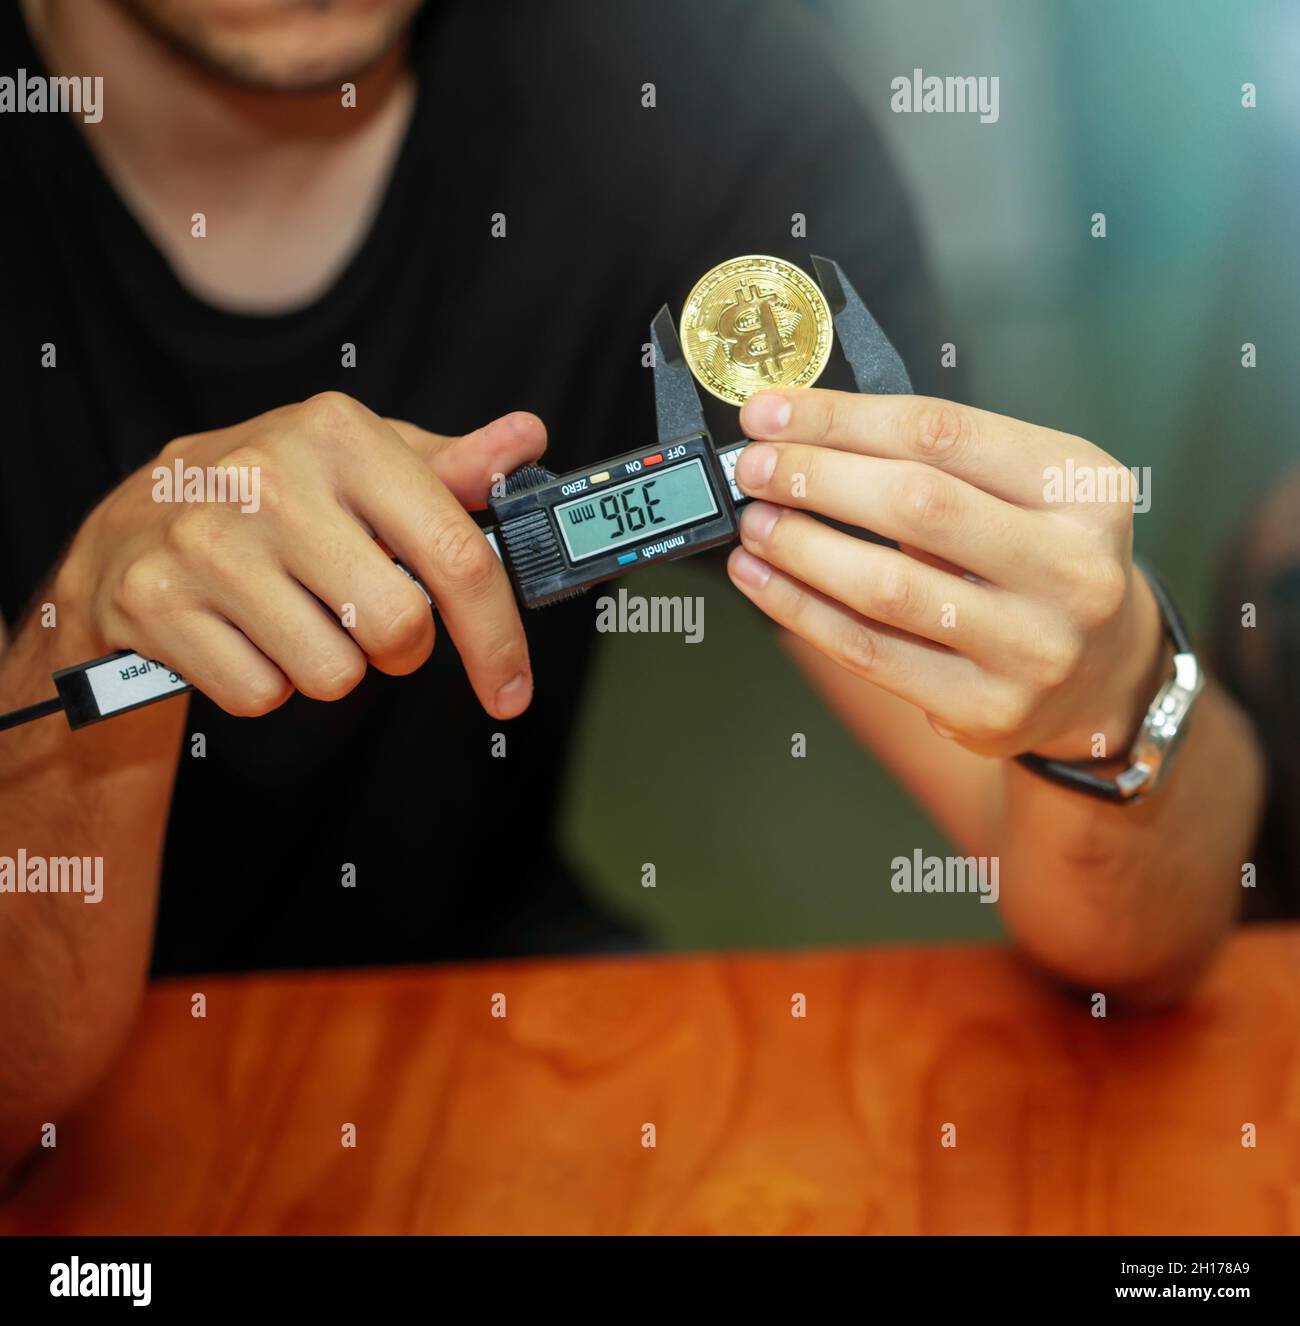 young man measuring with a Vernier caliper the size of the  bitcoin virtual currency Stock Photo